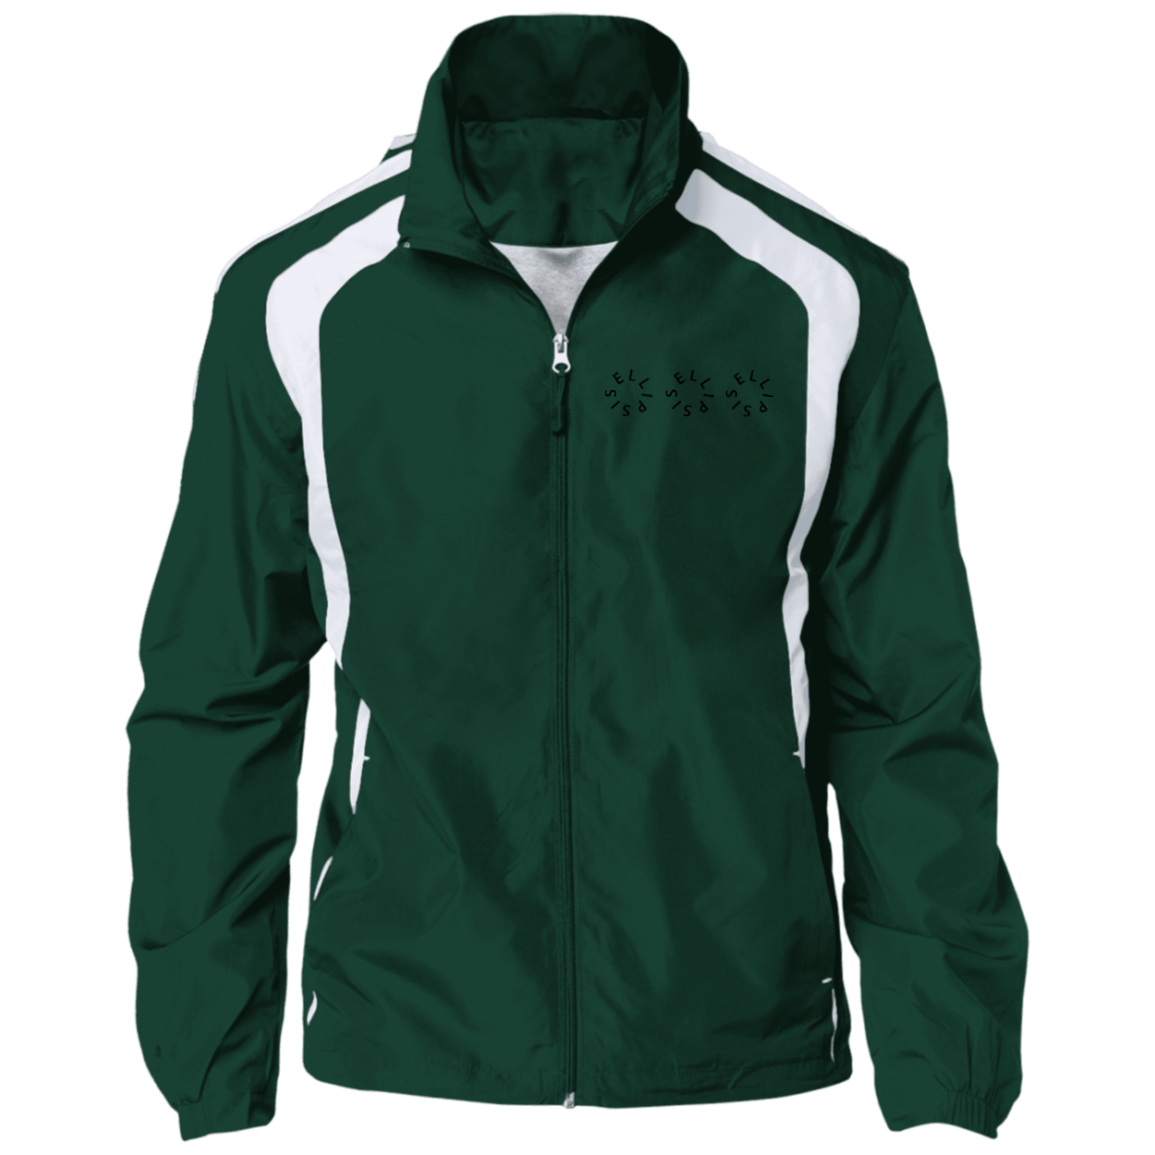 Jersey-Lined Jacket